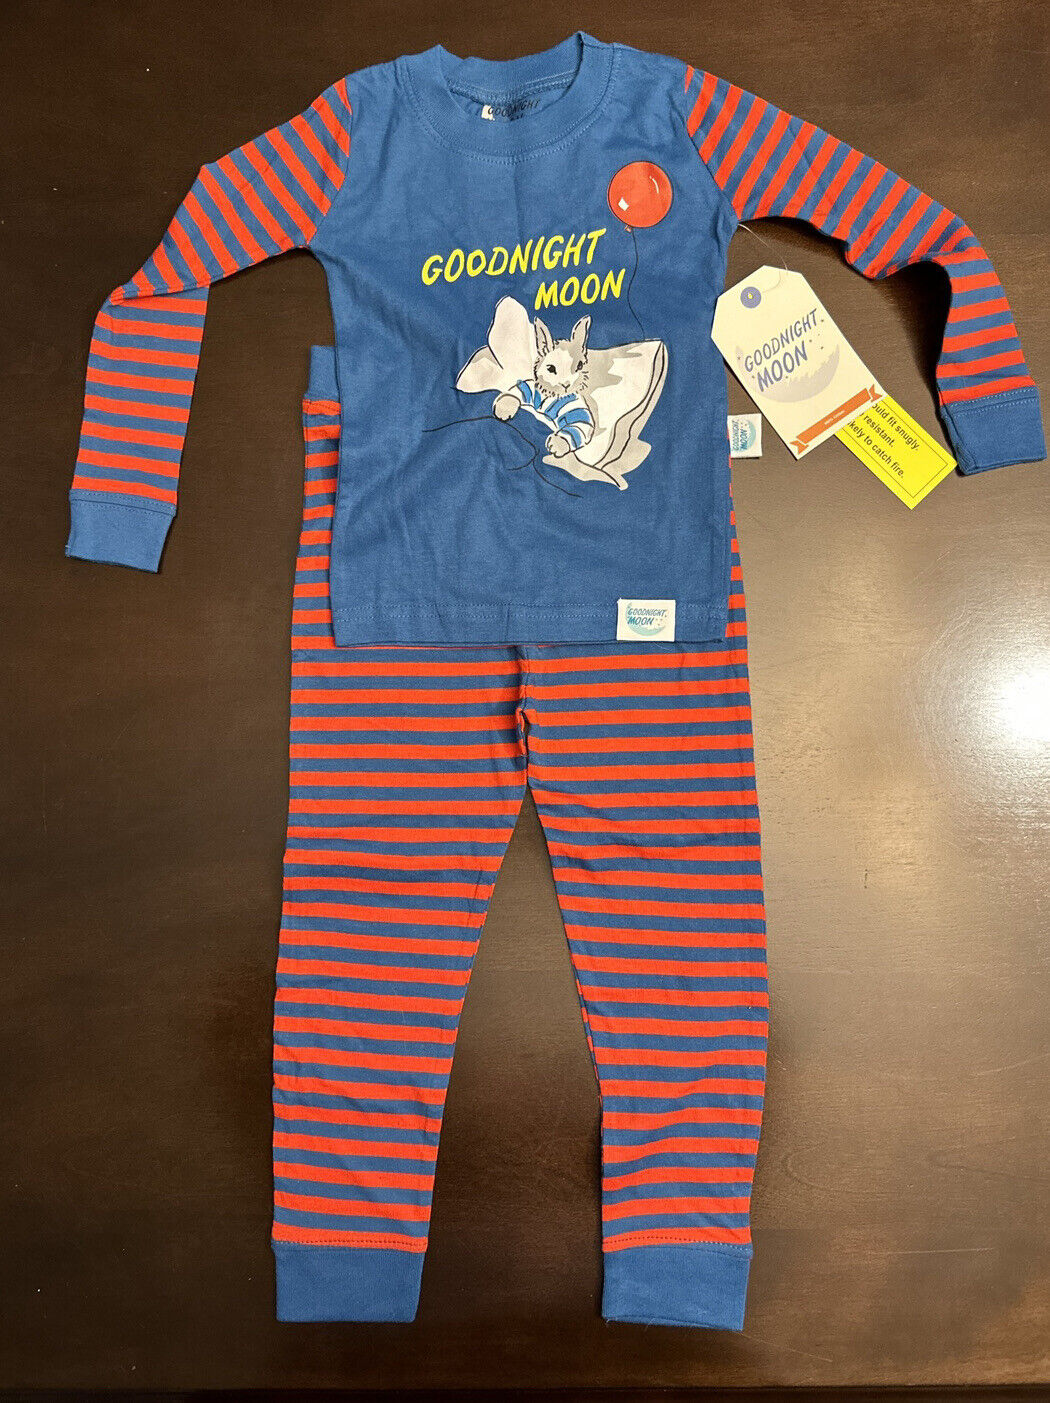 Goodnight Moon 3t Child's Pajamas- Teal/red ~stripes/long Sleeves-rabbit- Cotton